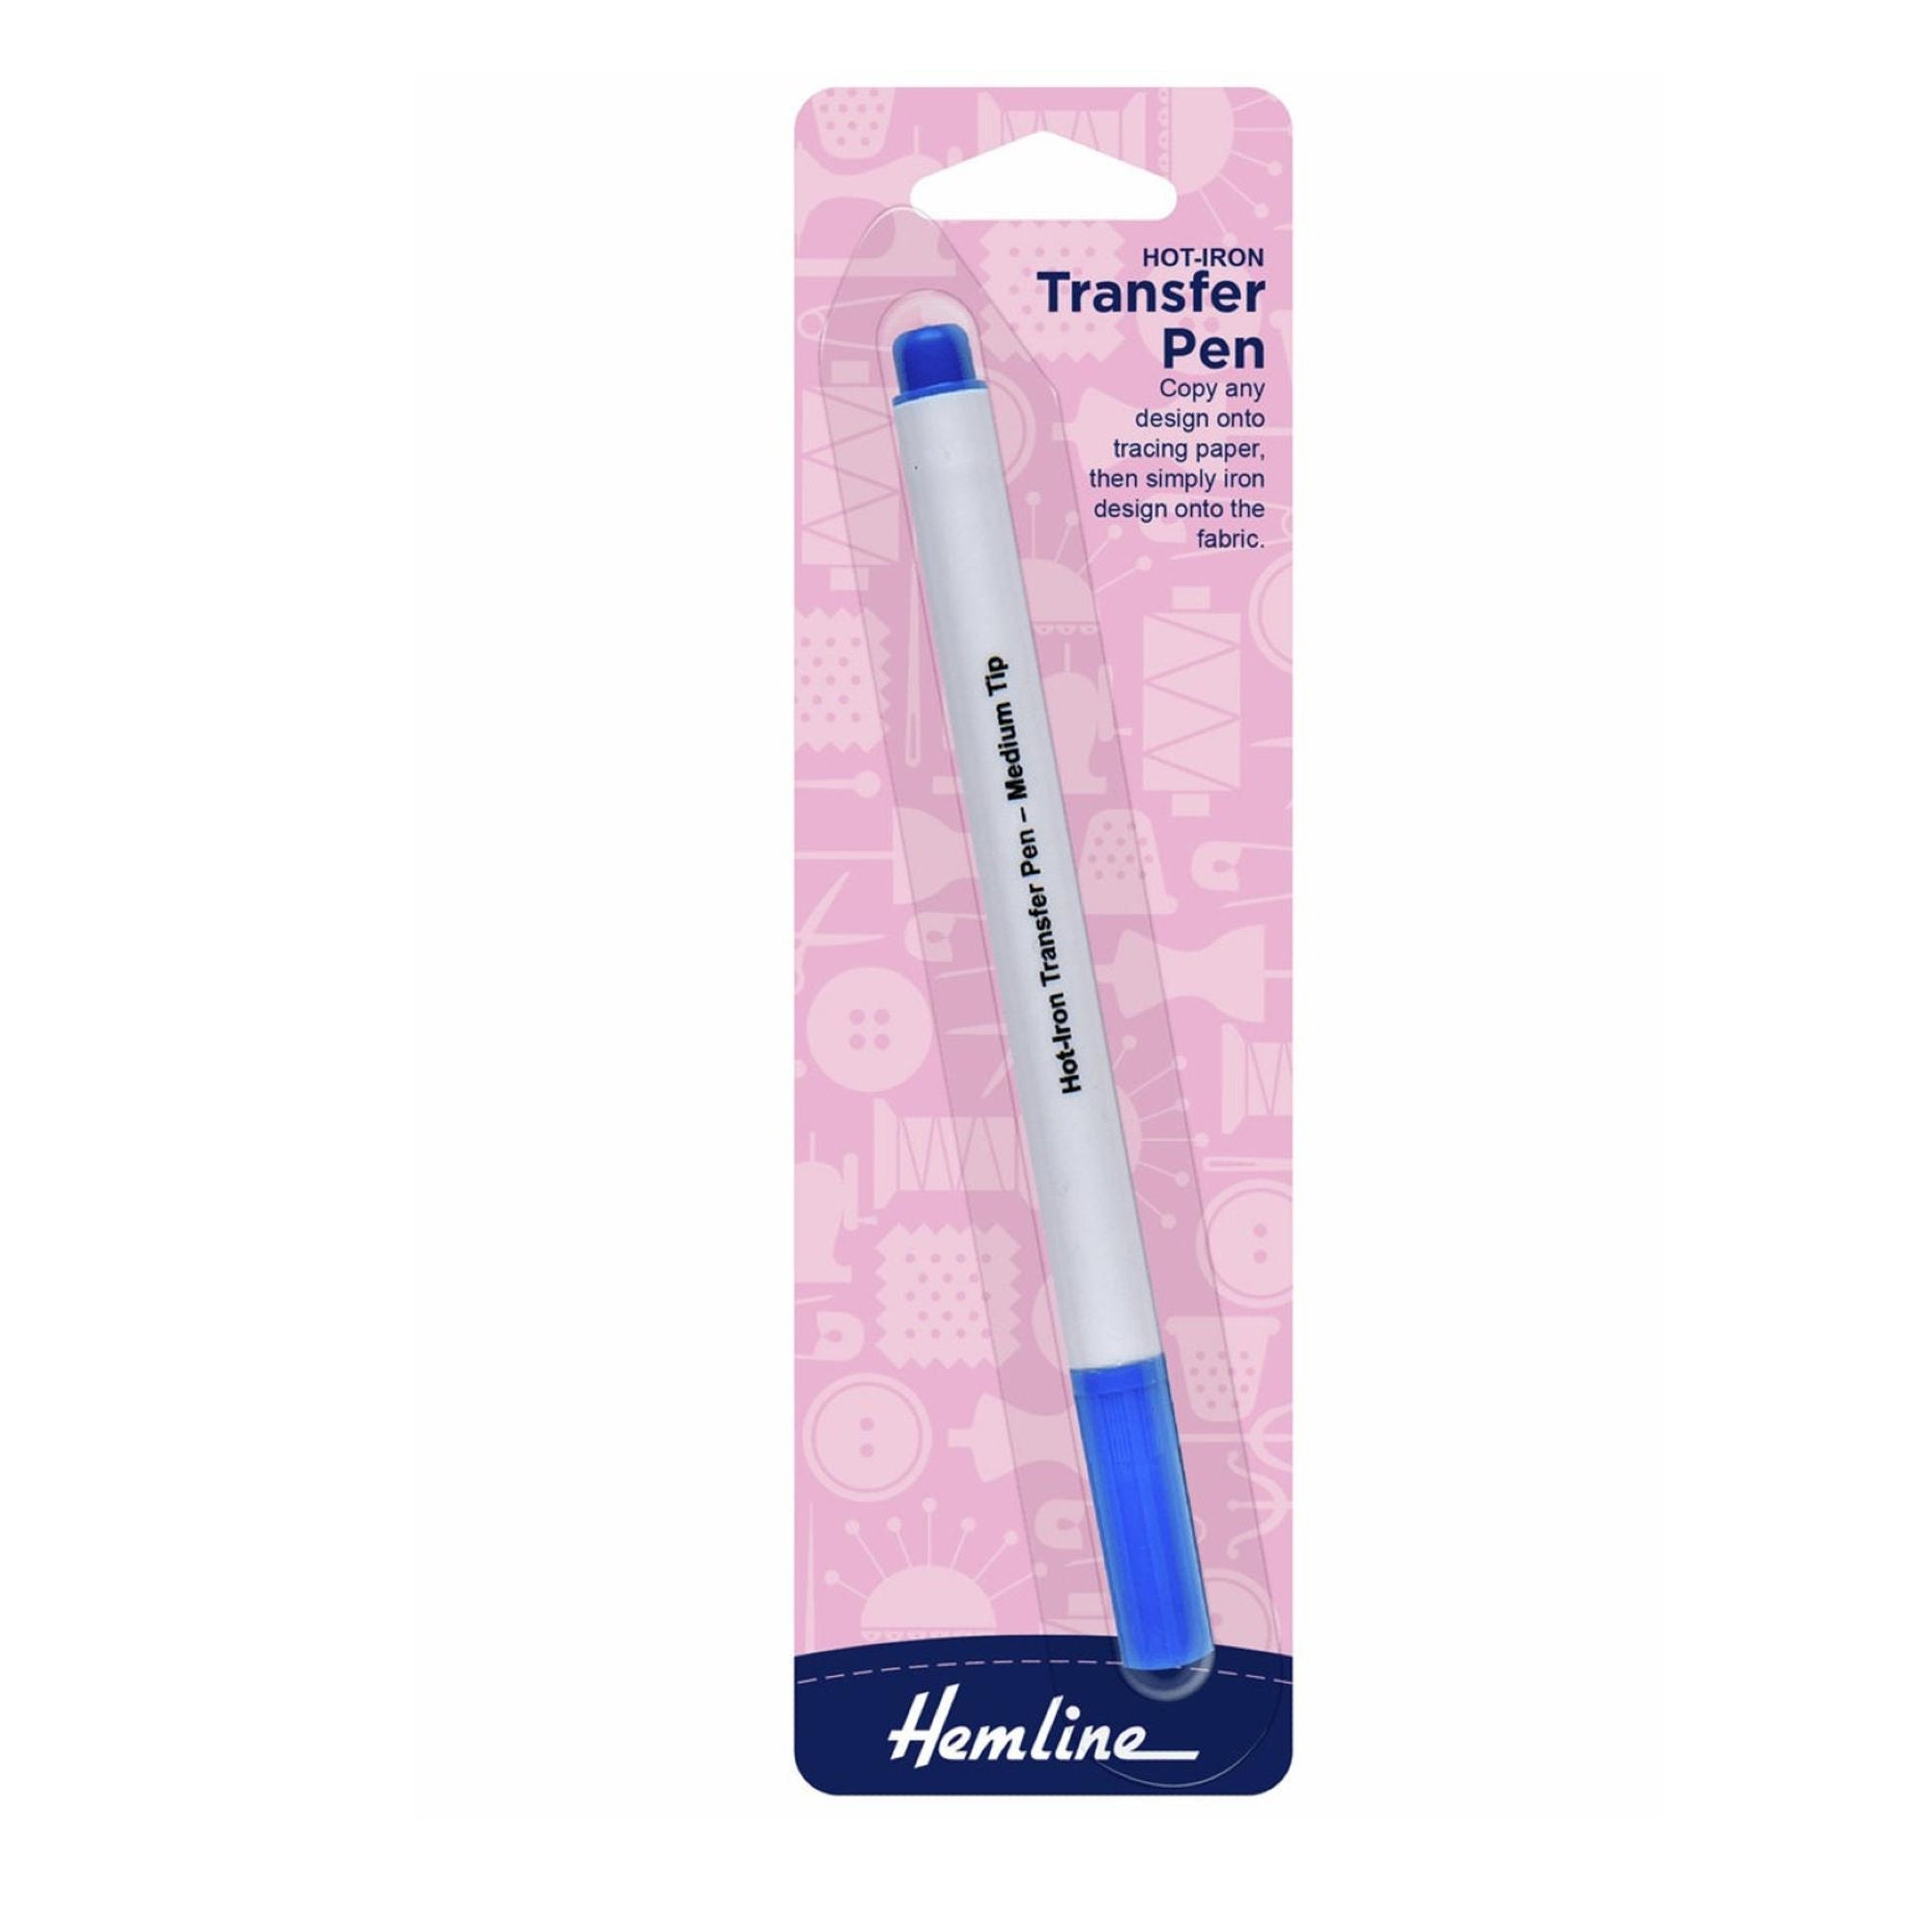 Frixion Pen Fineliner - Erasable fabric pen - rainbow colors - heat  erasable pen for fabric and pattern making - ships next business day!